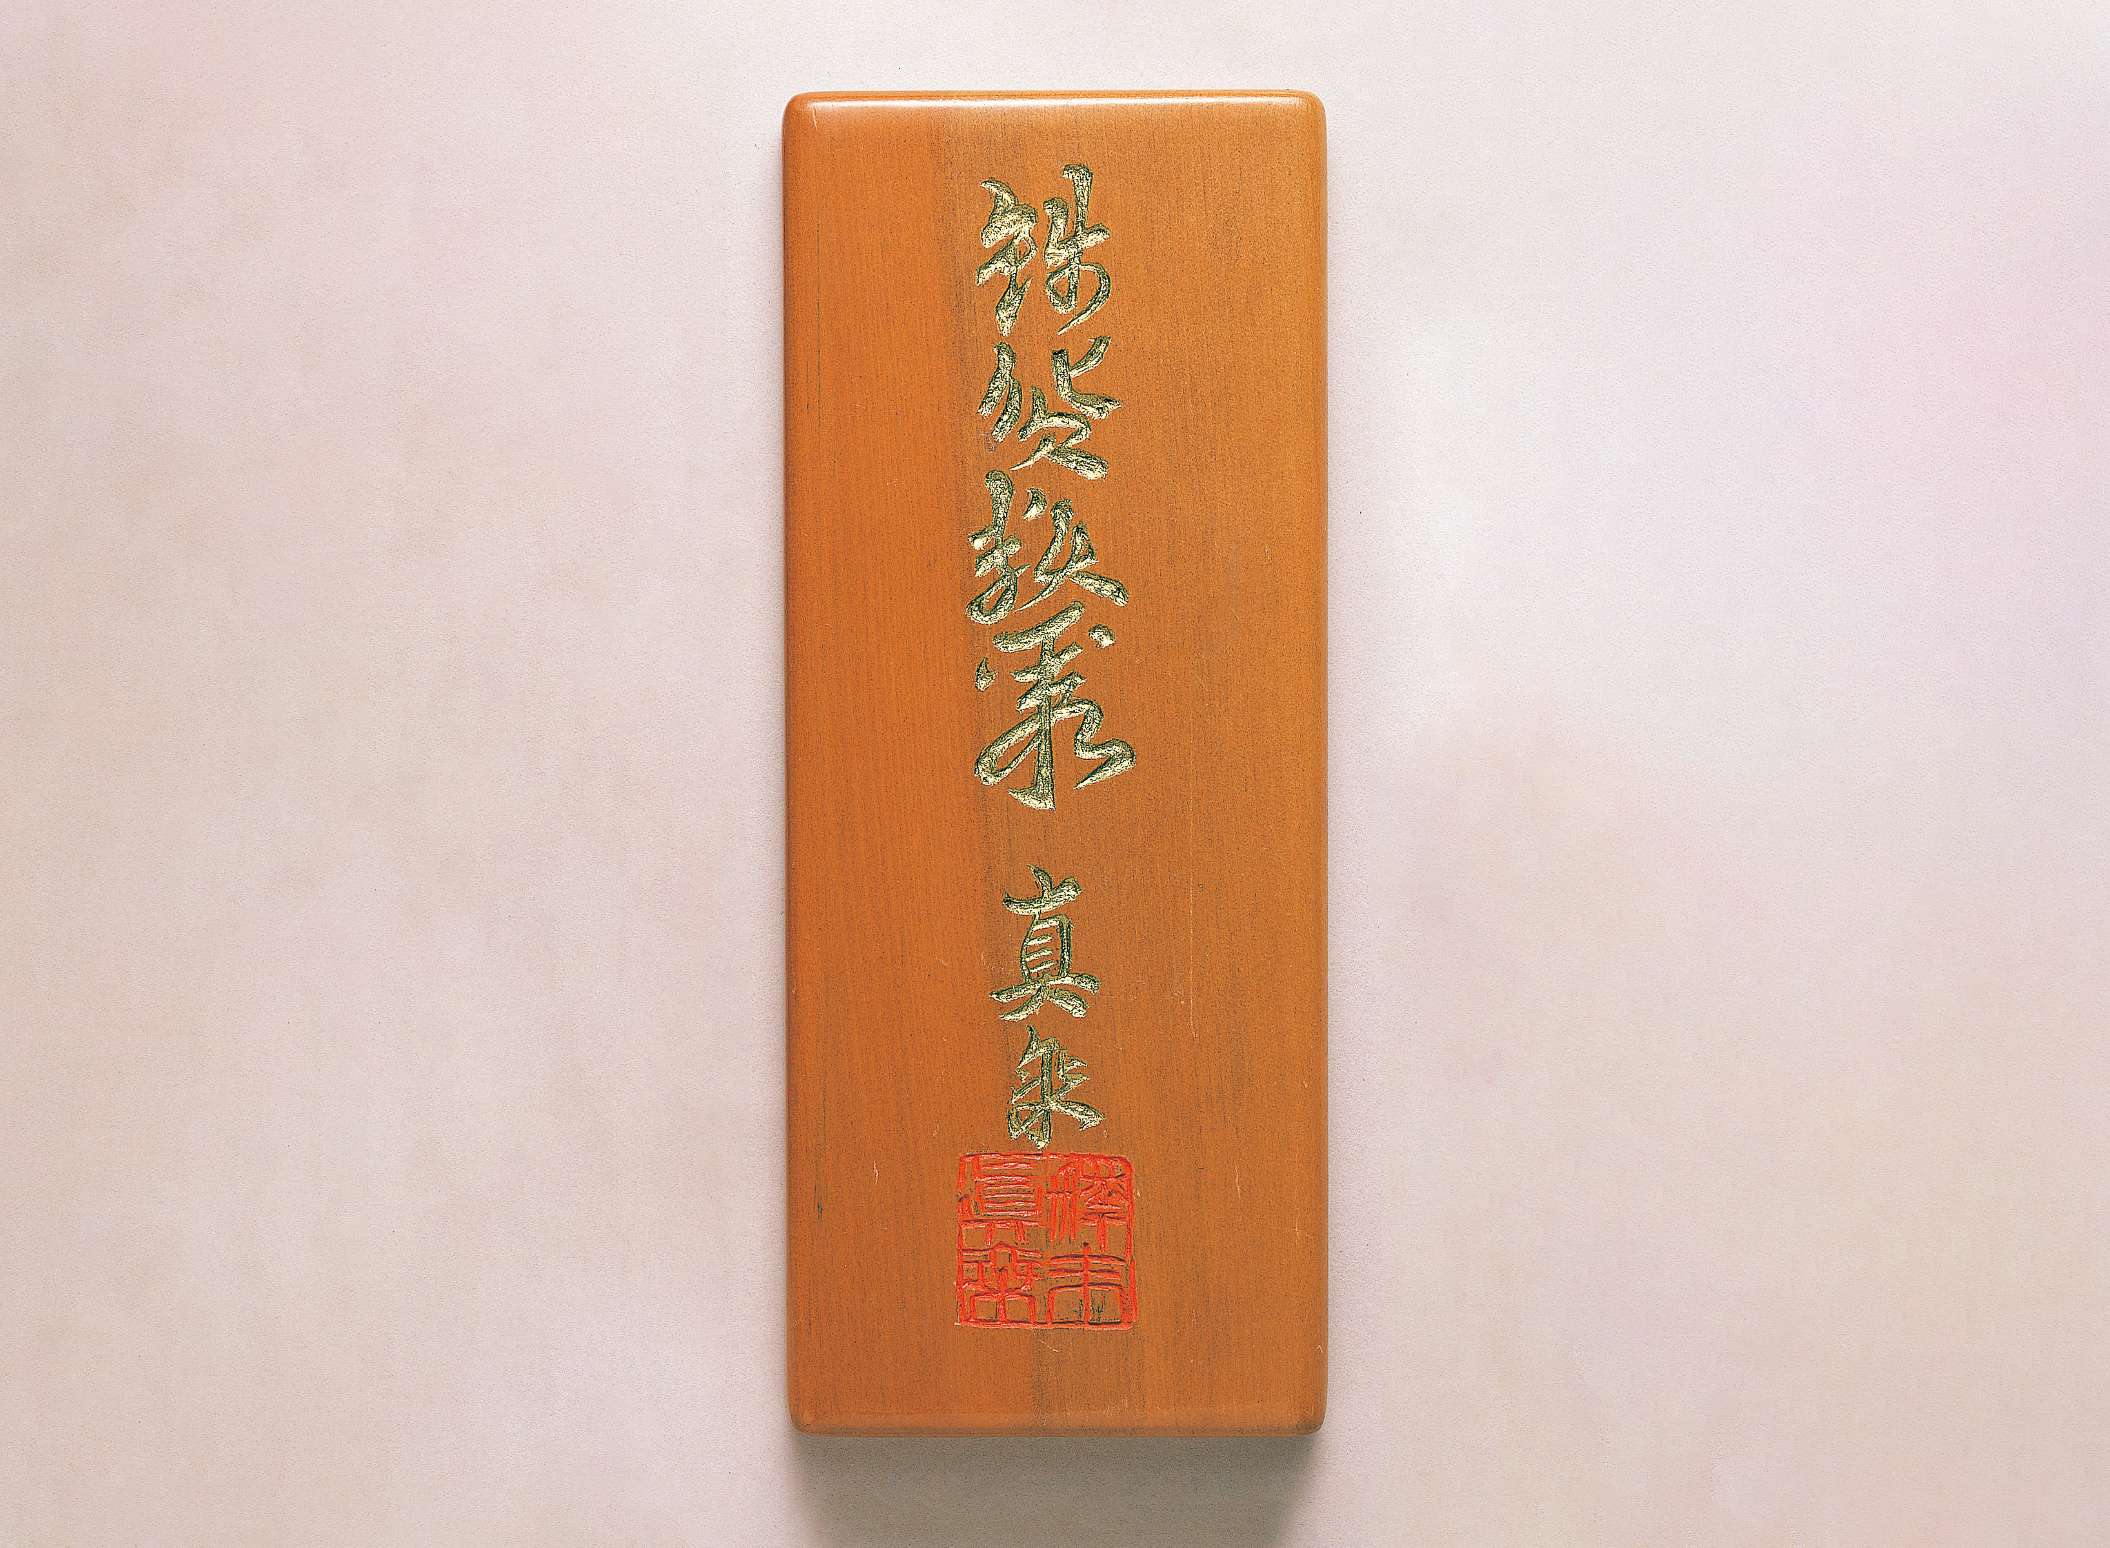 A vertically oriented rectangular slab of smooth, polished sienna colored wood is etched with flowing Japanese calligraphy in gold, beneath which a deep red calligraphic seal is etched.